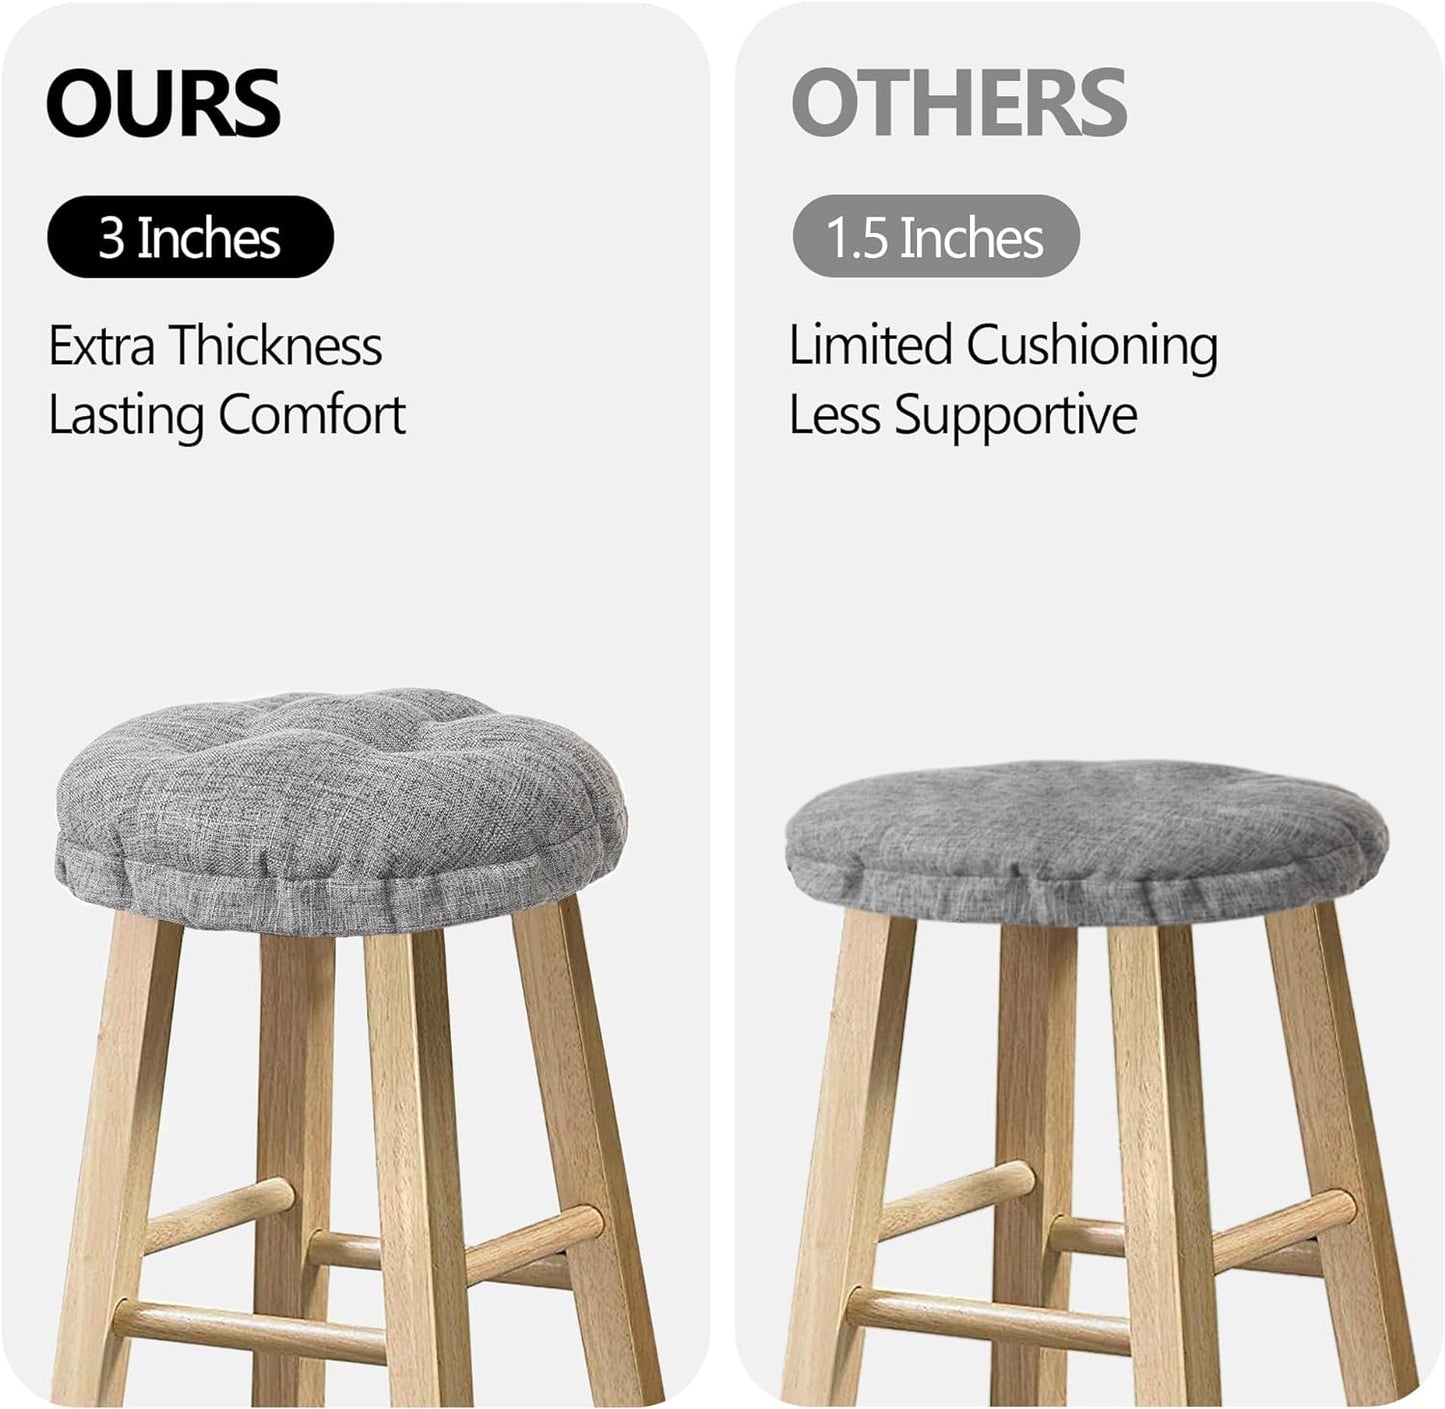 Sunlit Bar Stool Covers - Set of 2 Round Bar Stool Seat Covers, Soft and Cushioned Bar Chair Covers, Easy to Install and Wash, Cover Only, 14 Inch Diameter, Brown